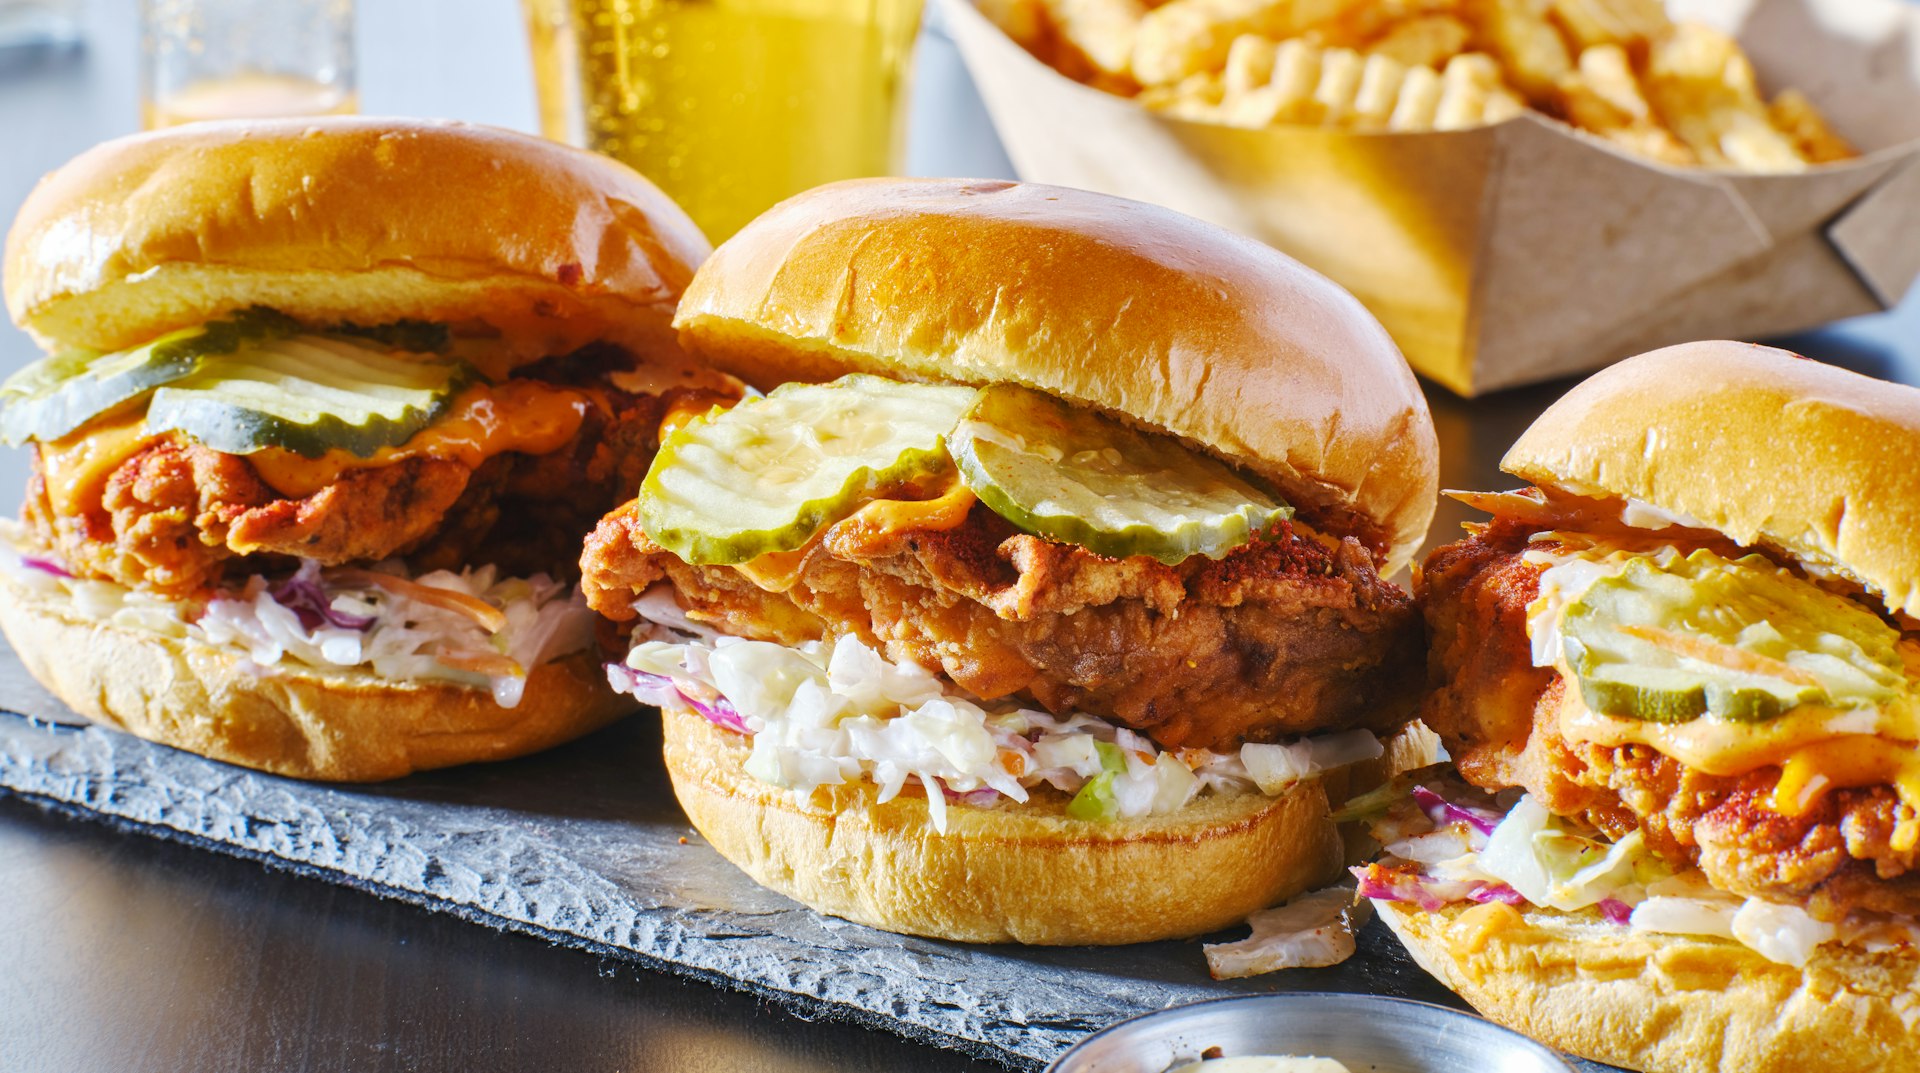 A trio of spicy Nashville hot chicken sandwiches with coleslaw and pickles